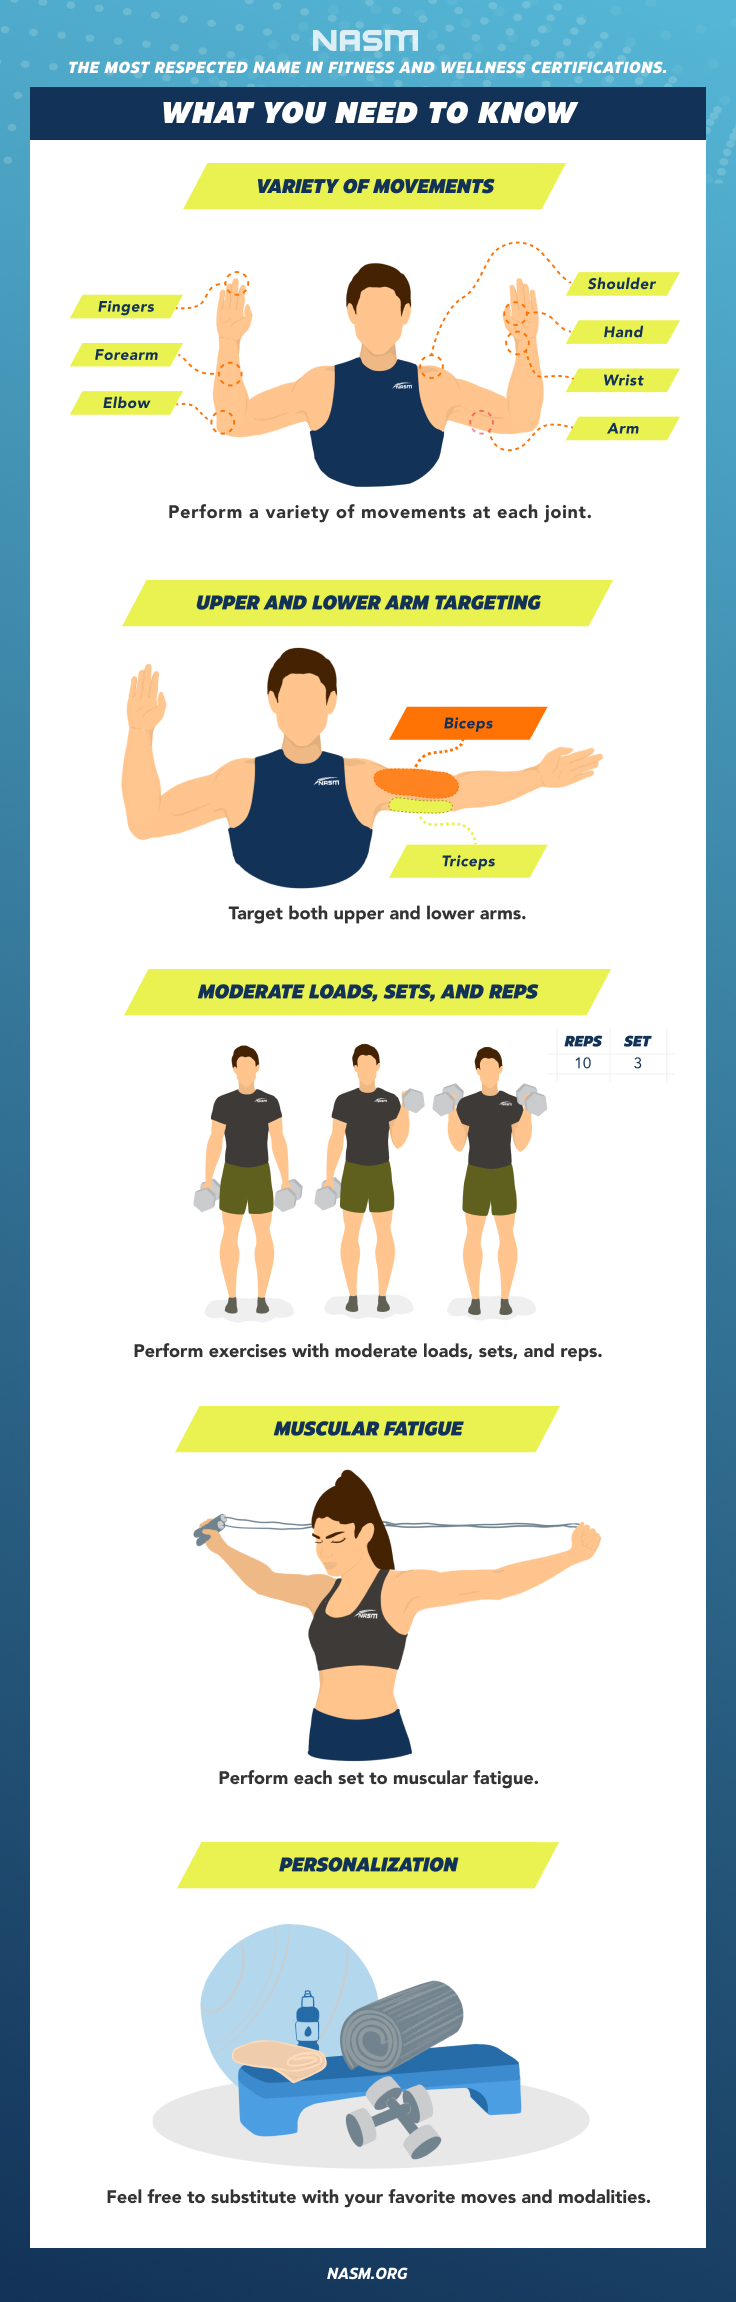 Free workout: Arms/Chest/Shoulders Standing – 1-min arms, back, shoulders  exercis…